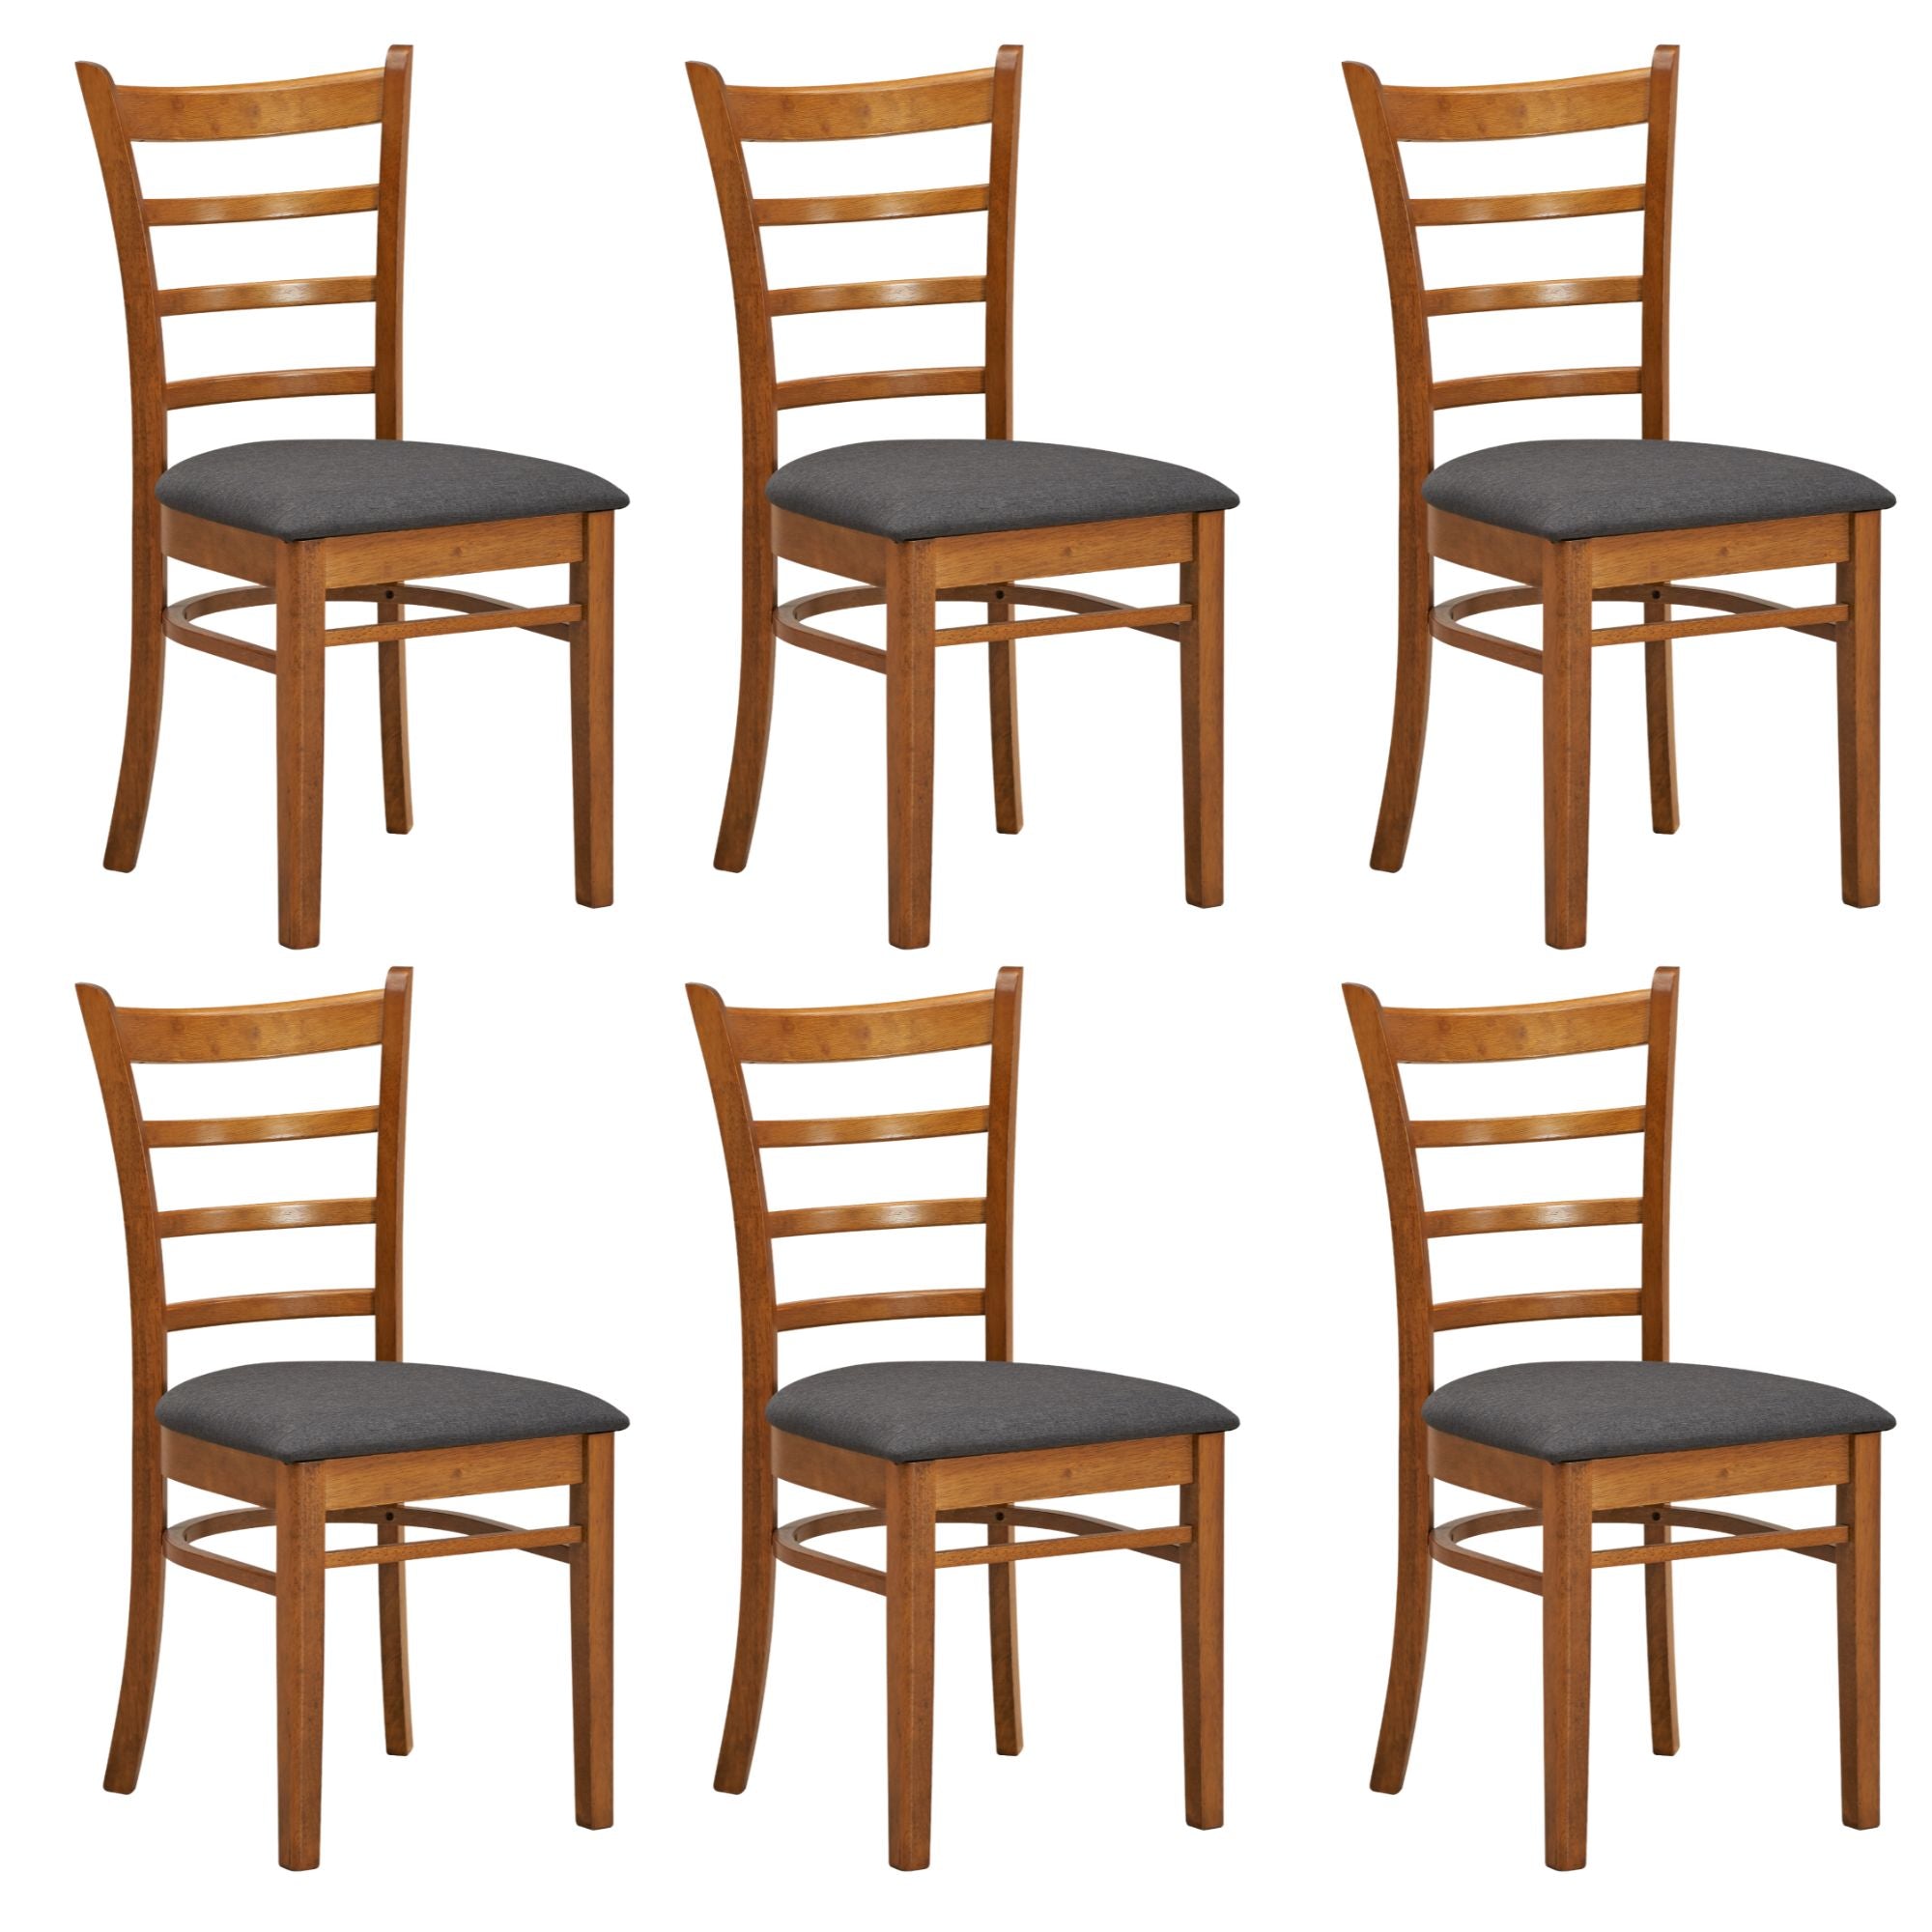 Linaria Dining Chair Set of 6 Crossback Solid Rubber Wood Fabric Seat - Walnut Deals499